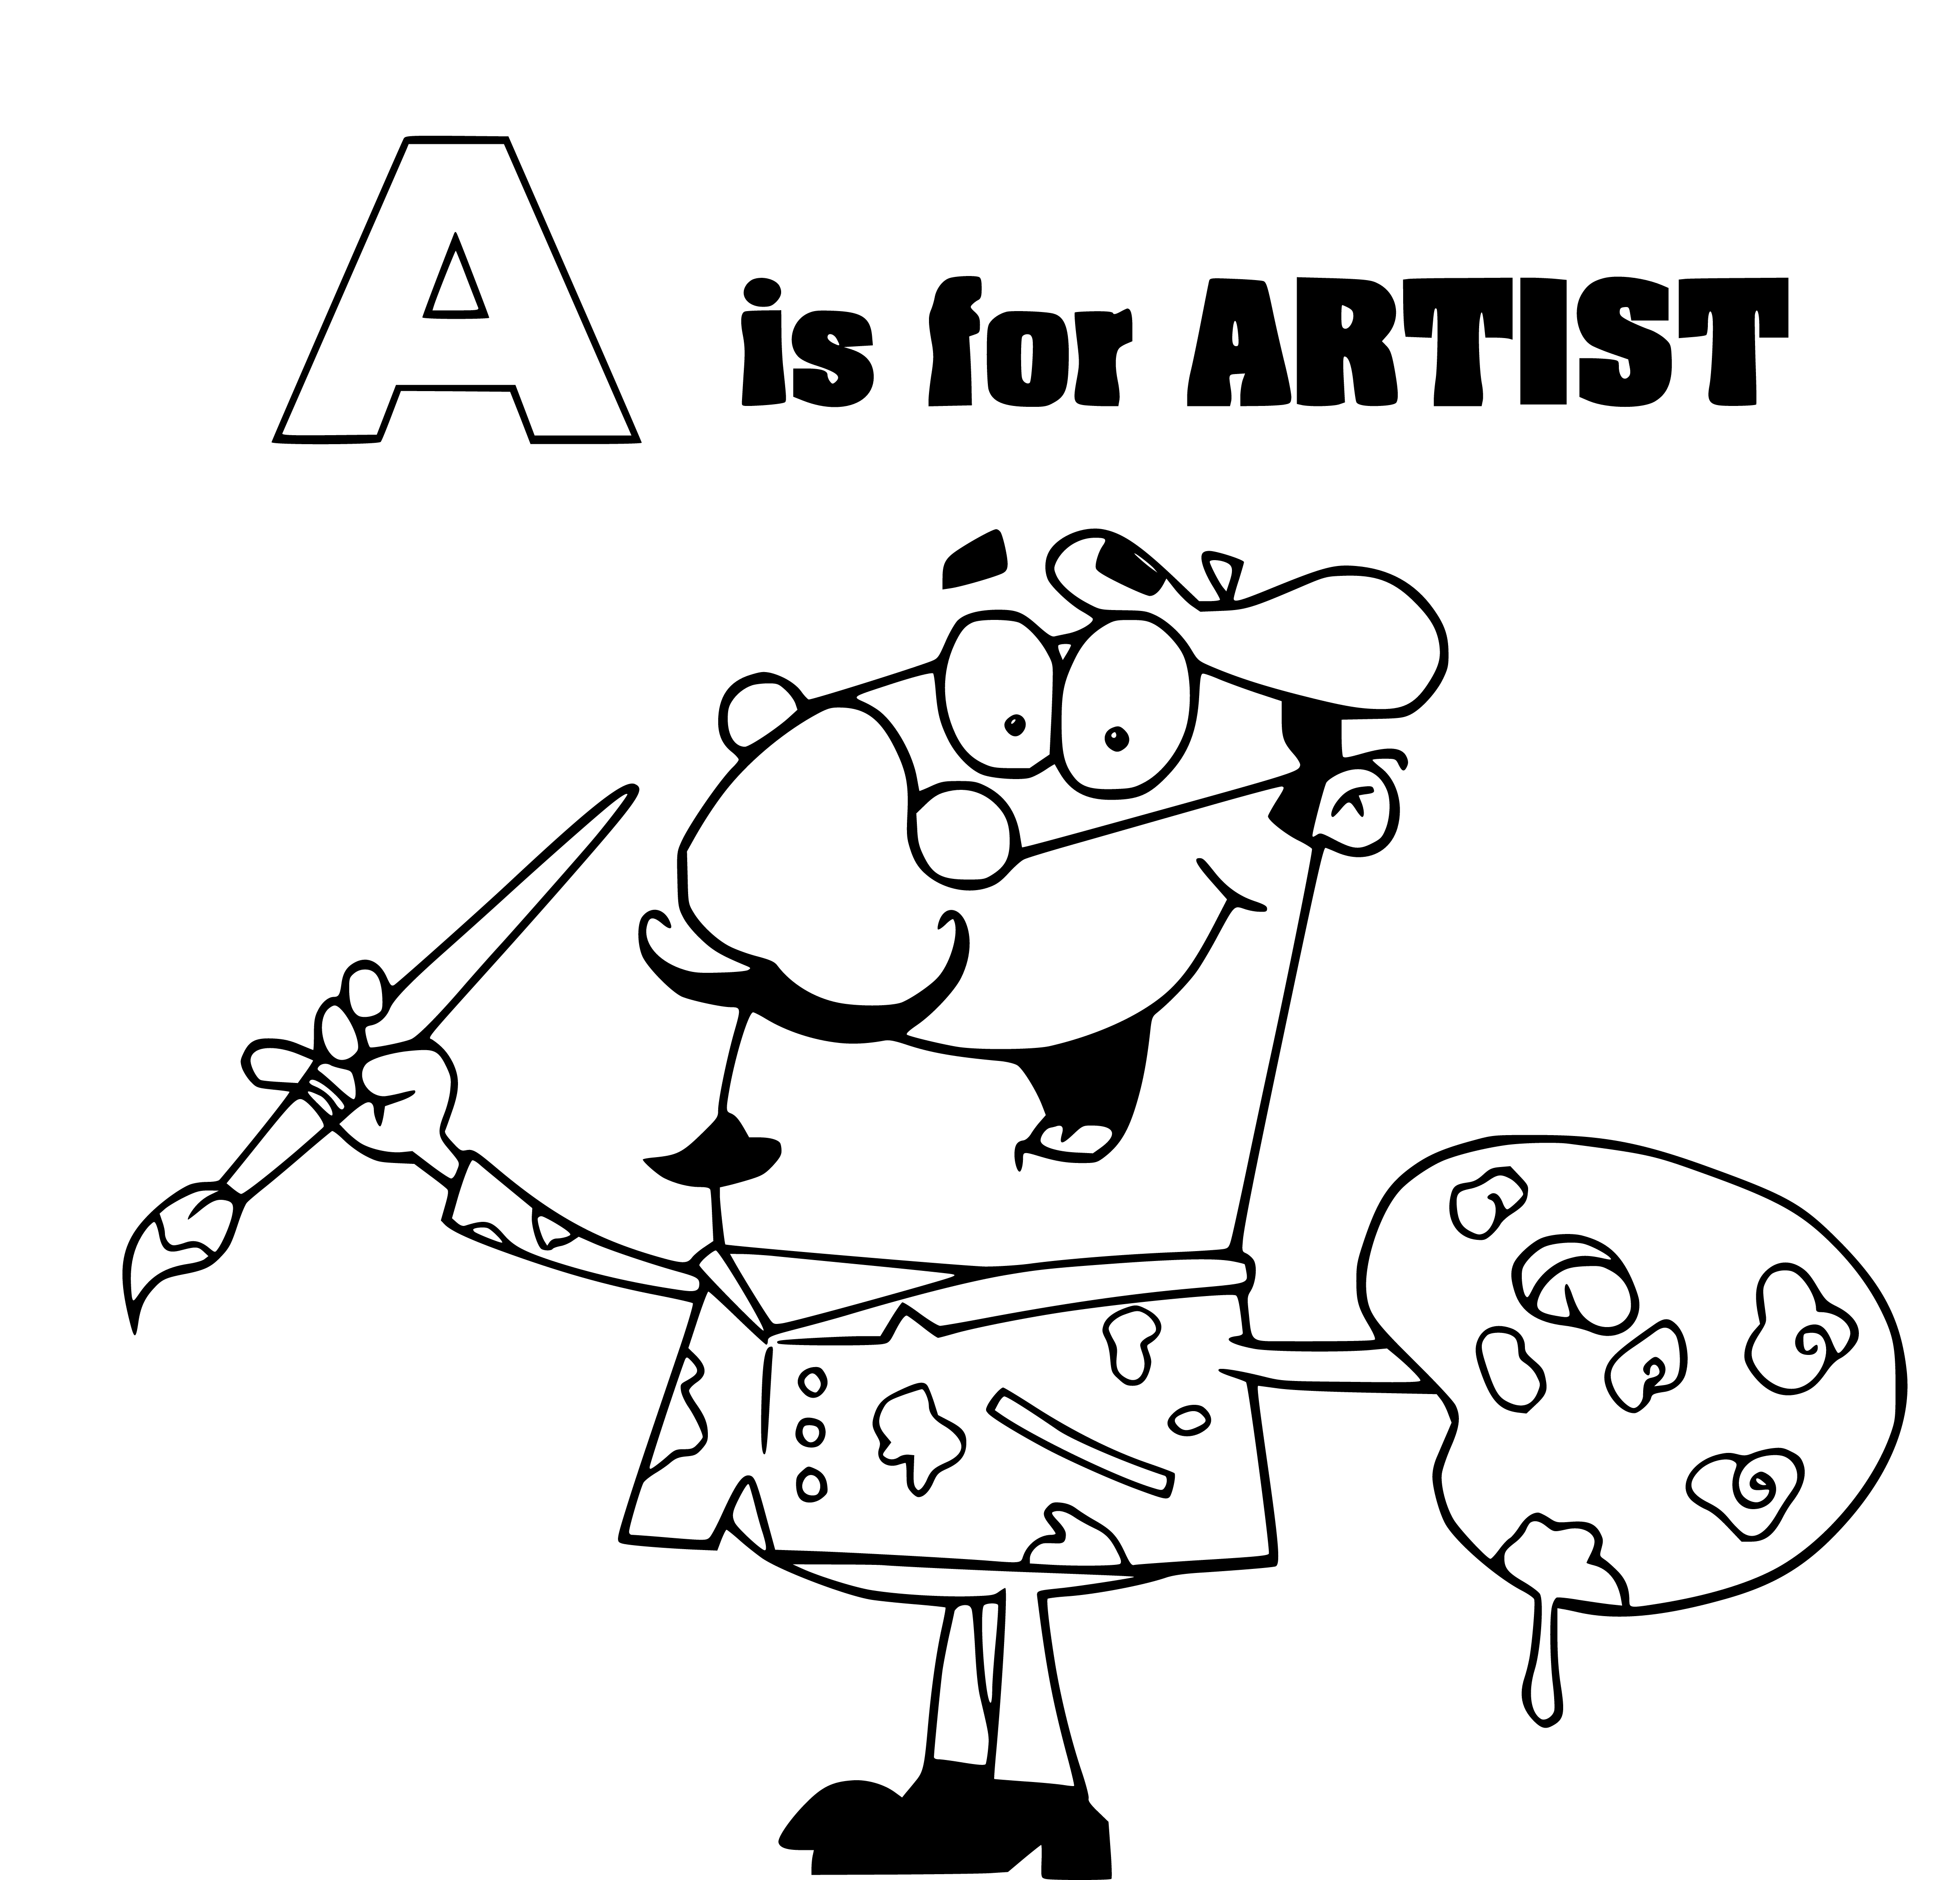 Letter A Coloring Page (a is for artist) - SheetalColor.com